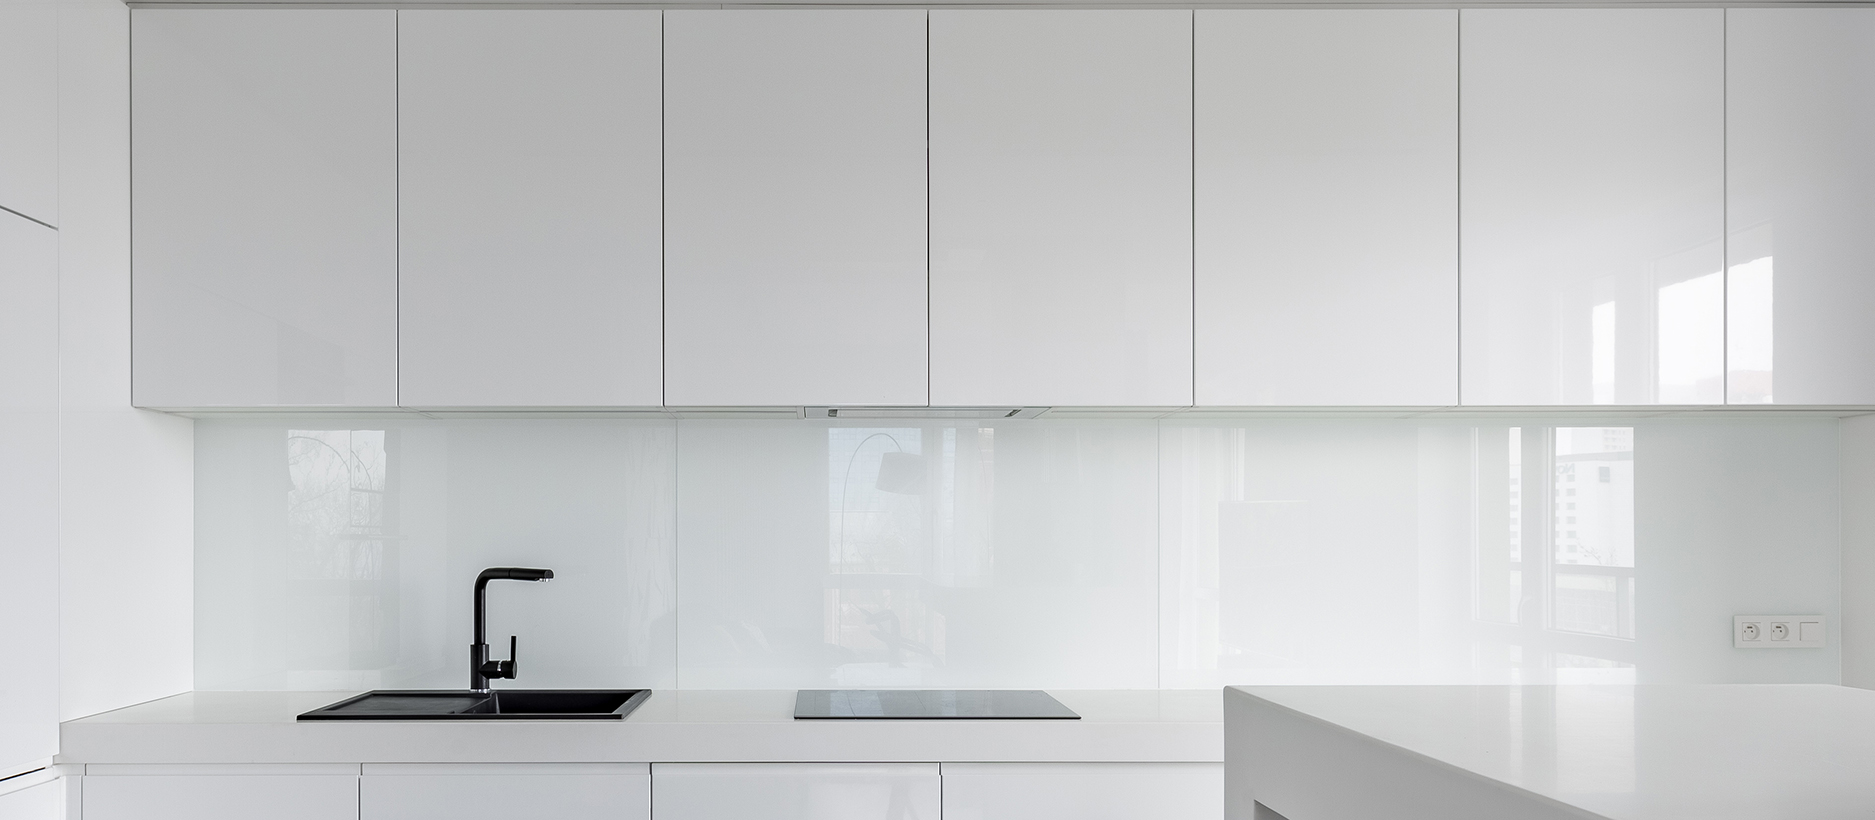 HIGH GLOSS WHITE KITCHEN DOORS & DRAWER FRONTS STUNNING ITALIAN QUALITY